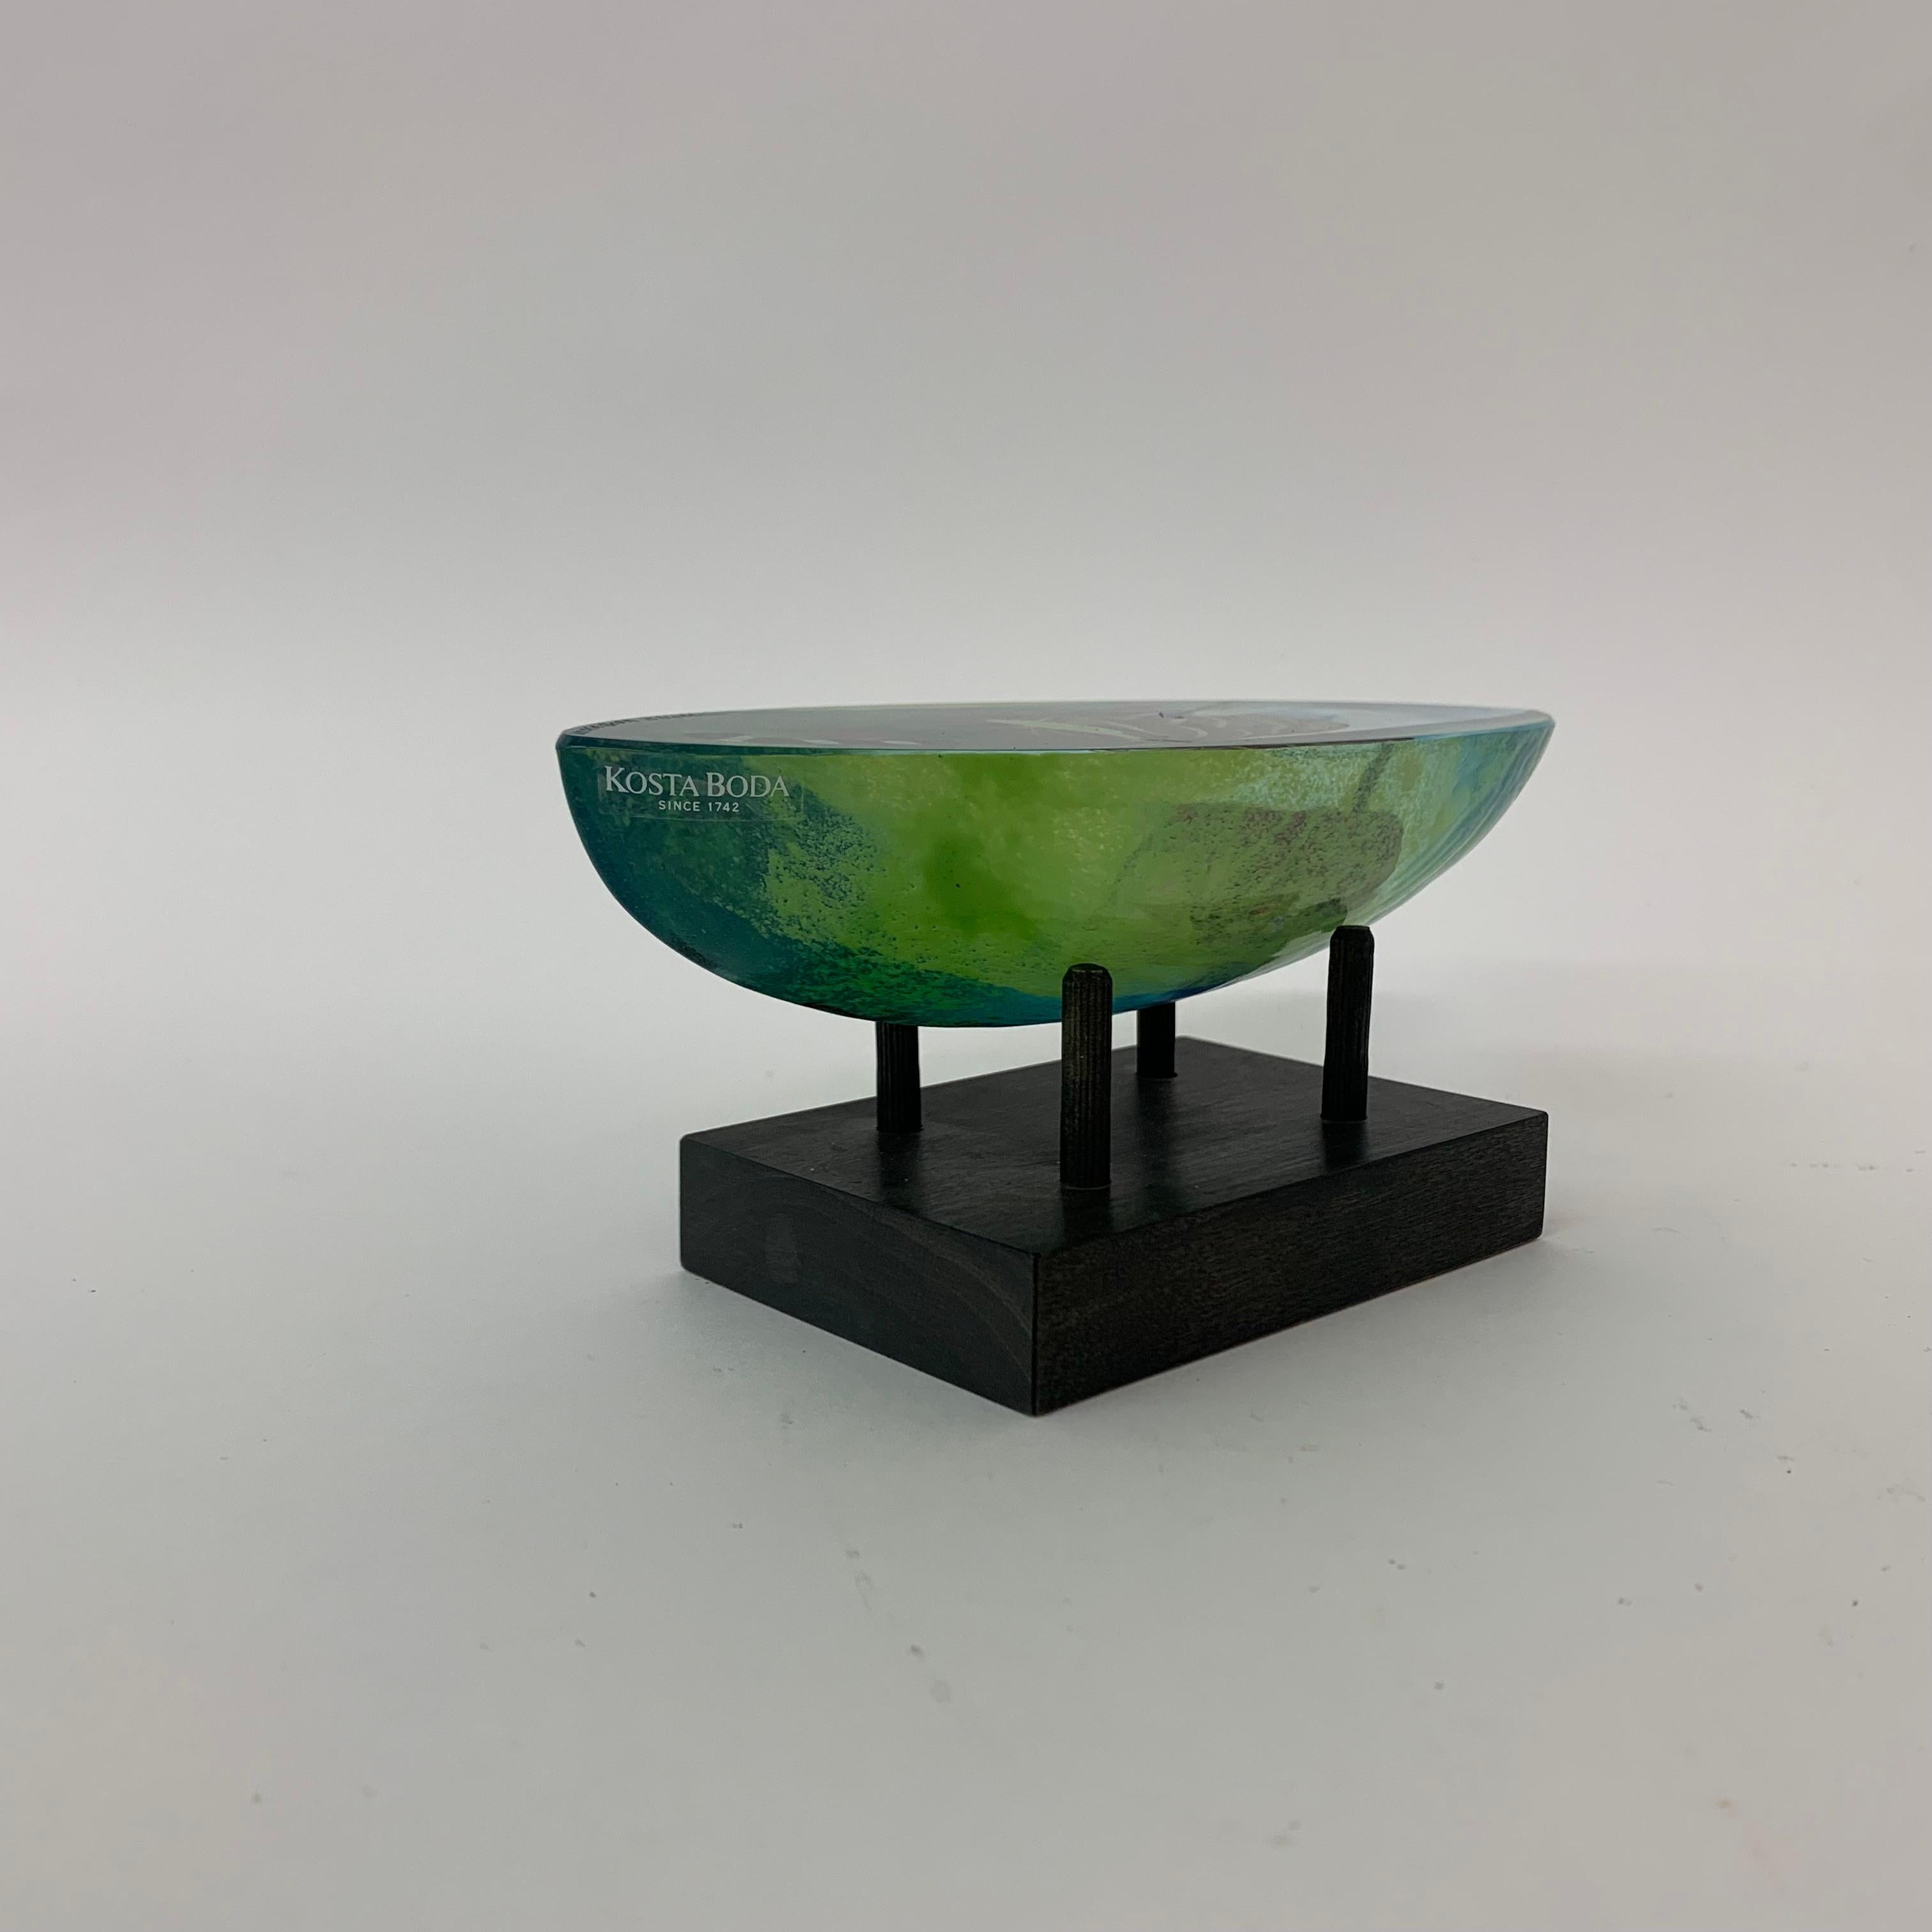 Art Glass Bertil Vallien for Kosta Boda Boat Atelier Collection limited edition For Sale